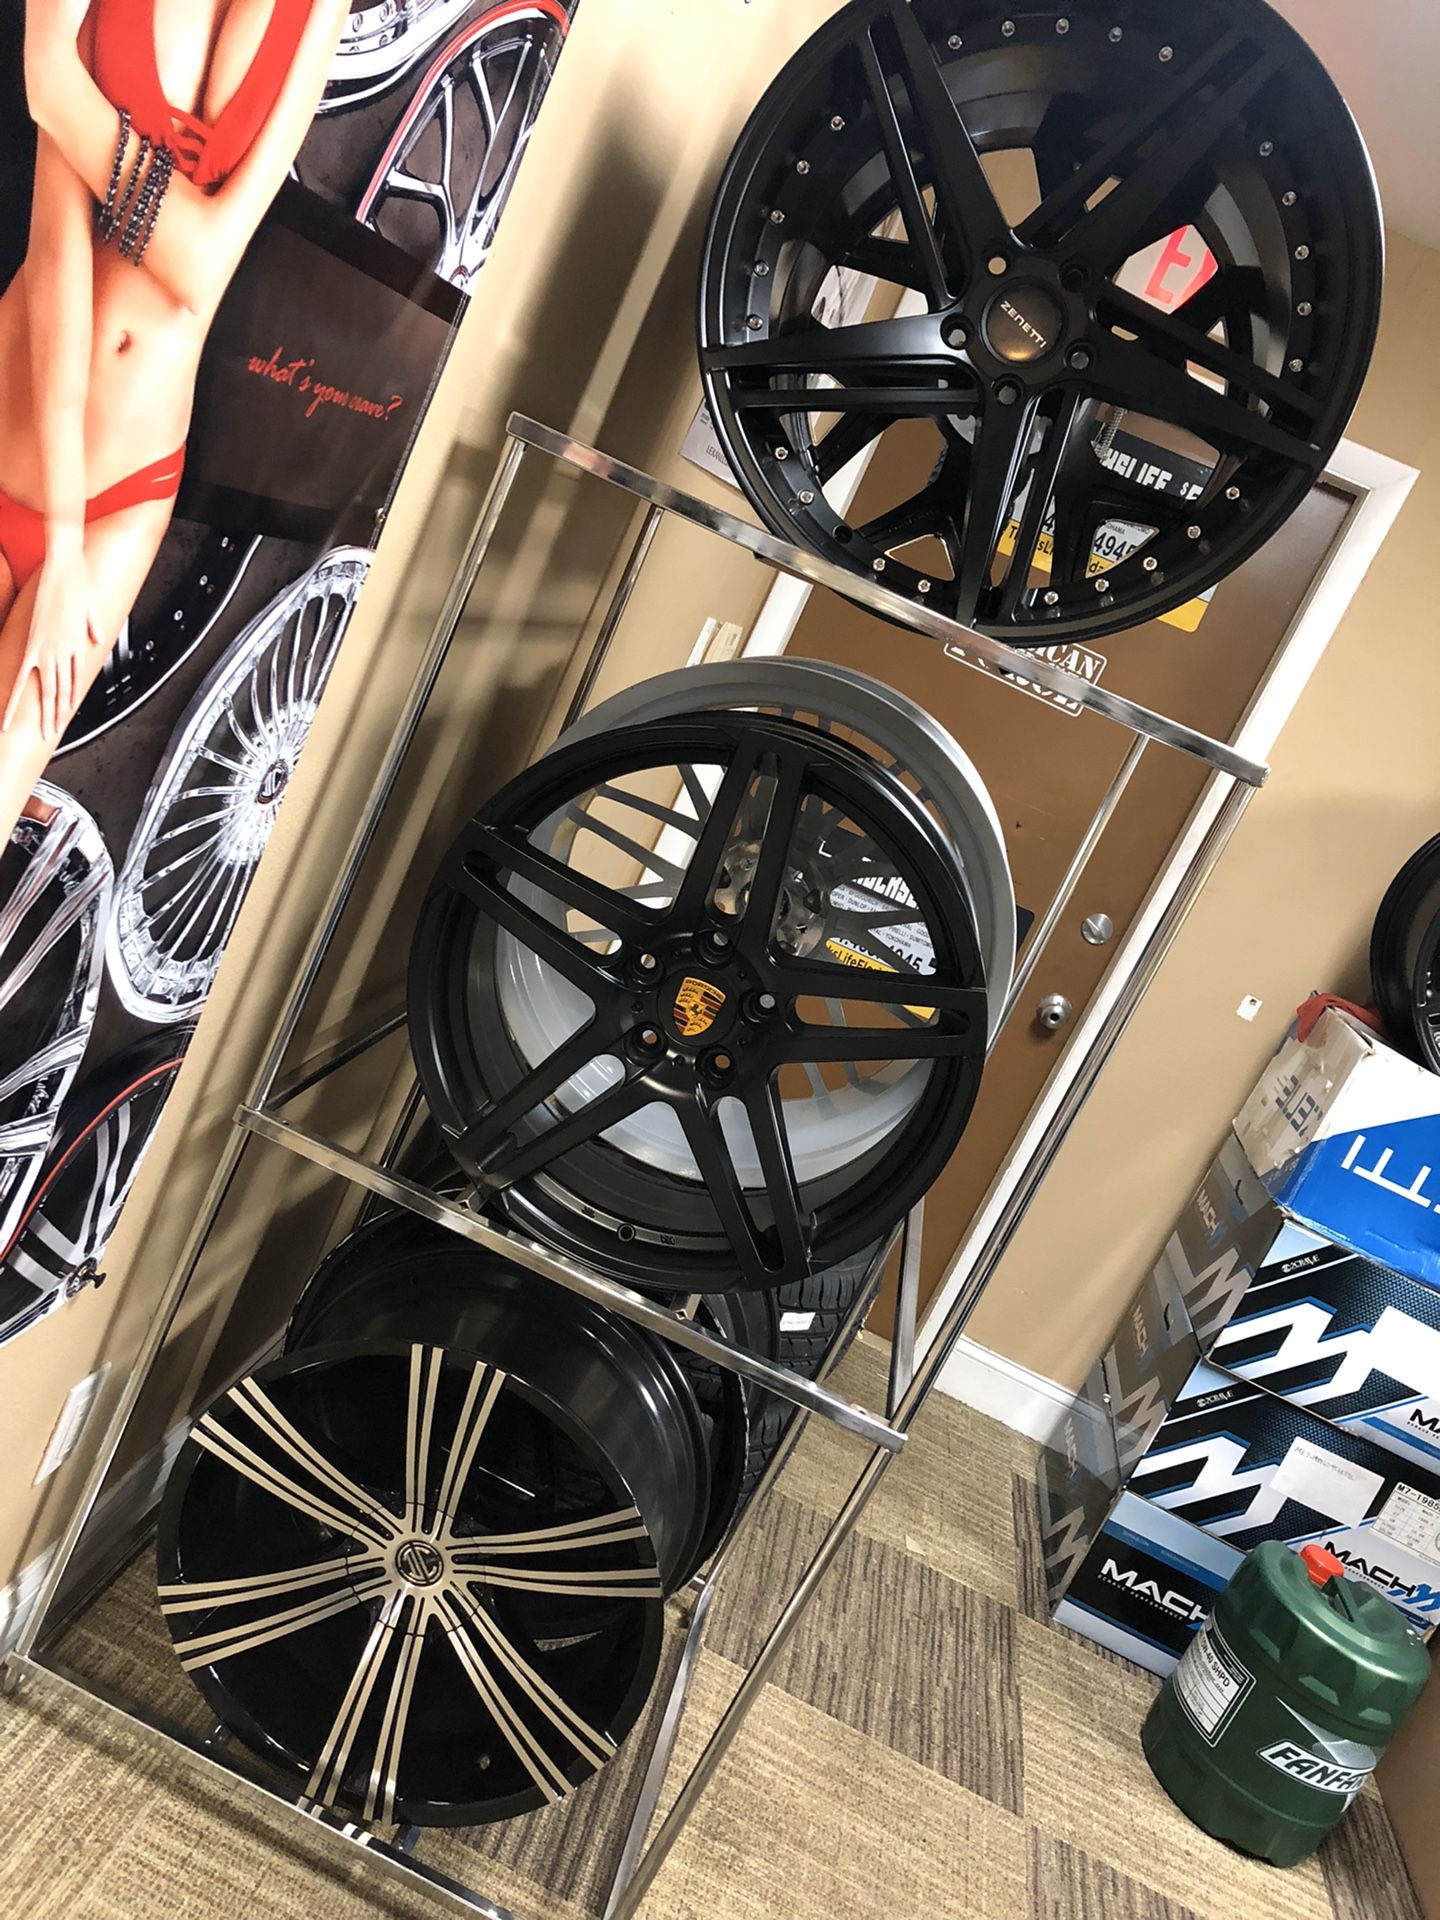 Wheels & tires! Best prices, ask for your bolt pattern